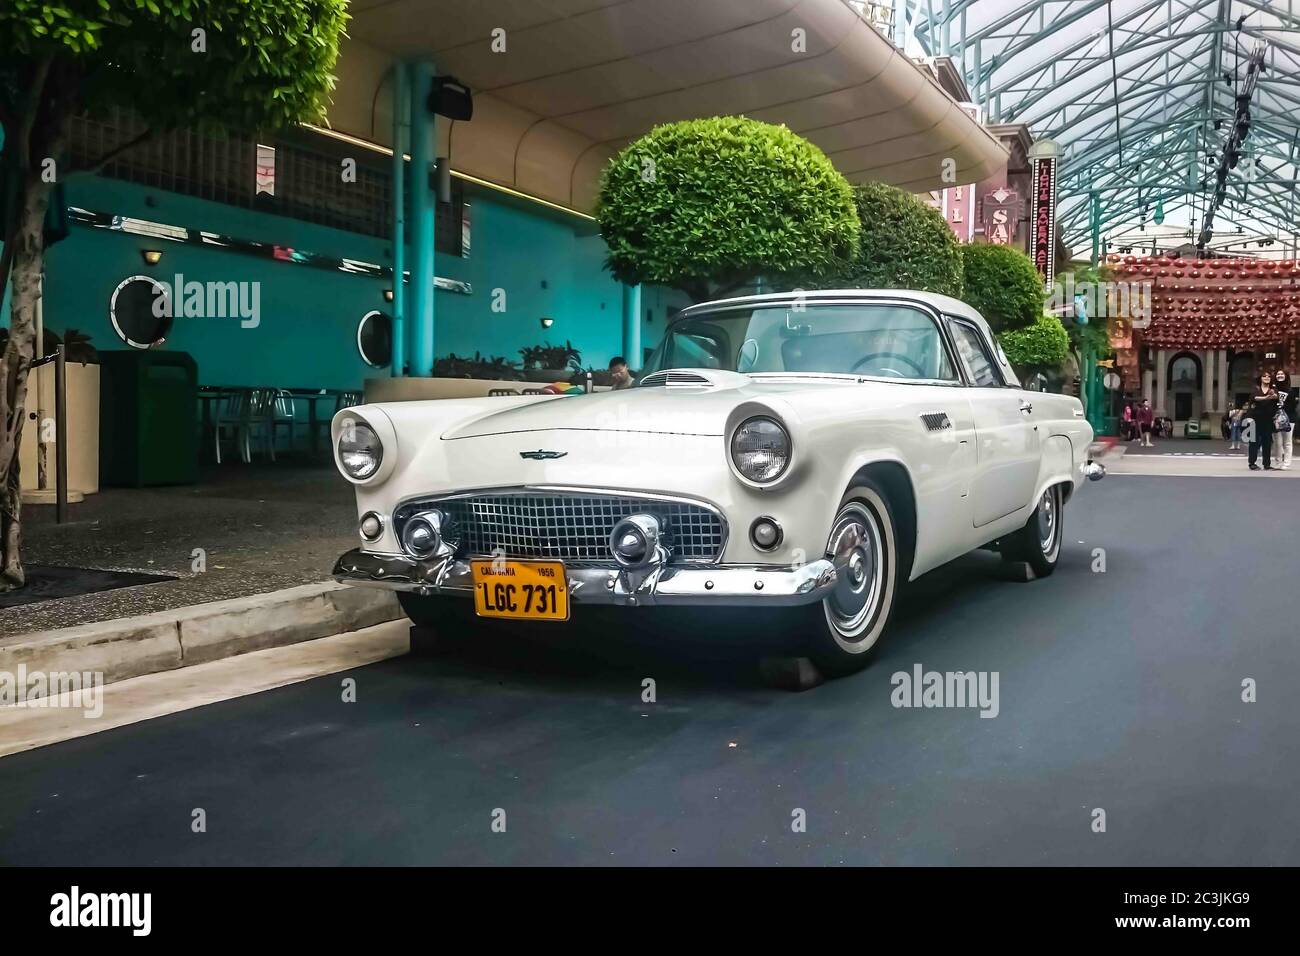 Singapore - May 25, 2019: Ford thunderbird 1957 in white color parked on the street. Left front side view Stock Photo